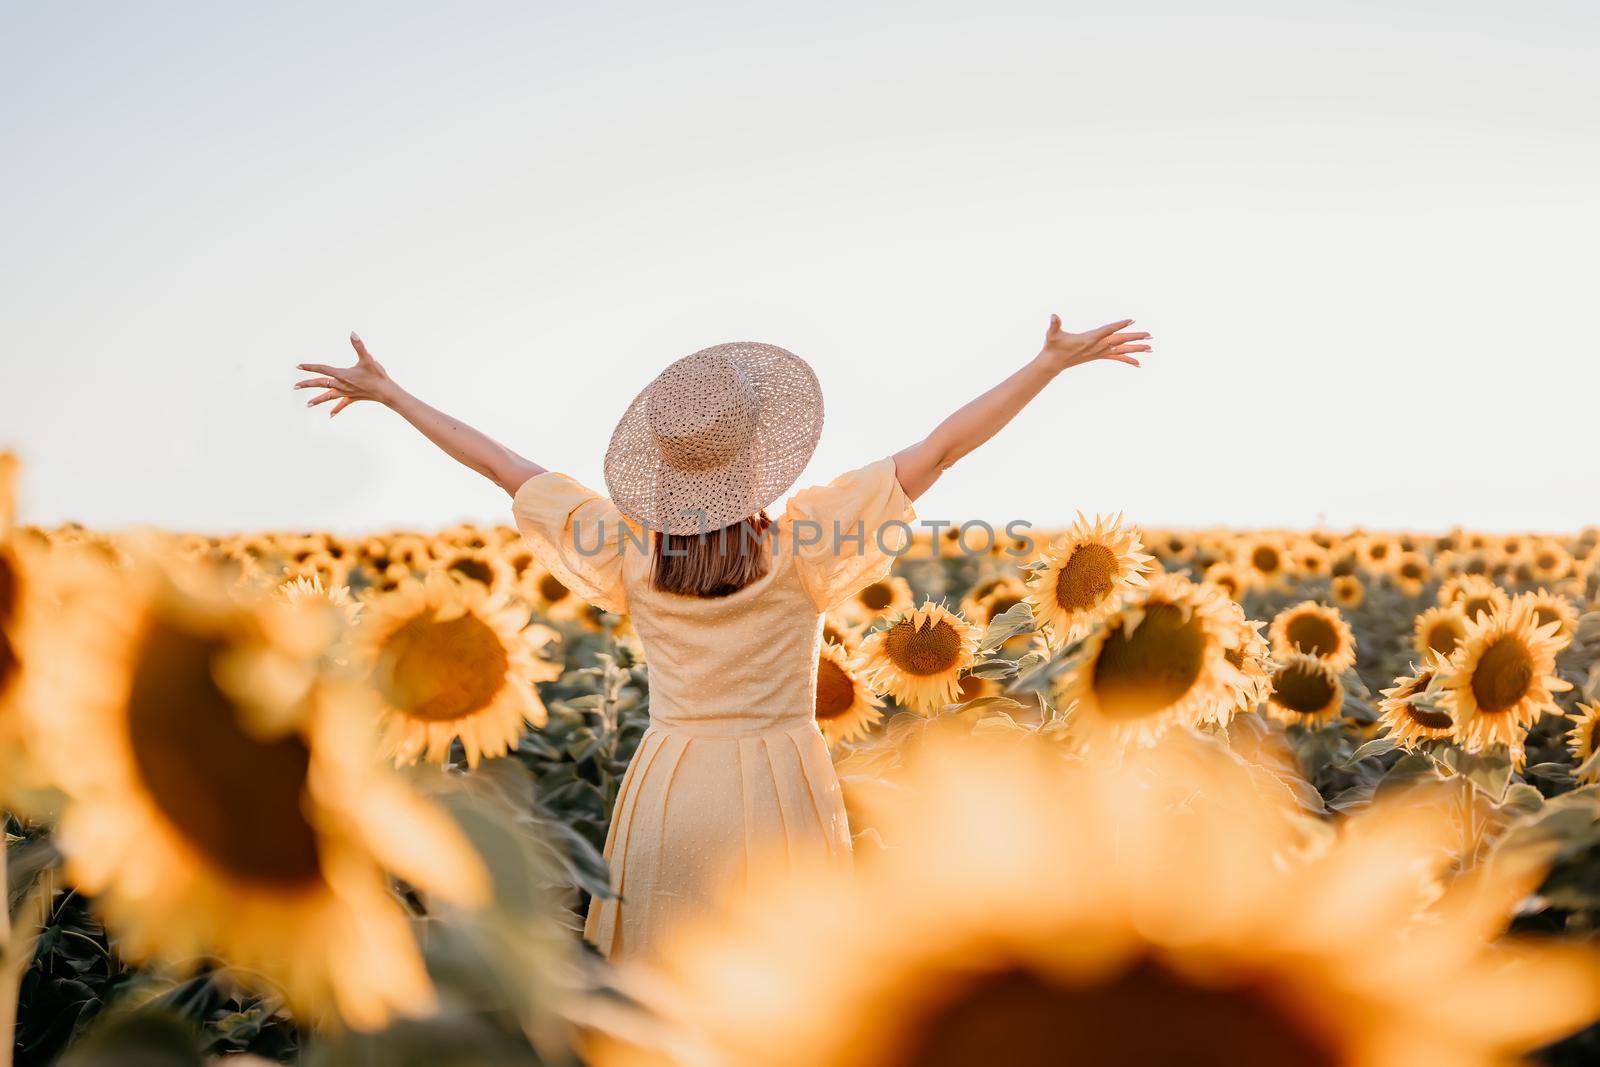 Woman with open arms in sunflowers field. Yellow colors, warm toning. Free girl in straw hat and retro dress. Vintage timeless fashion, amazing adventure, countryside, freedom scene.High quality photo